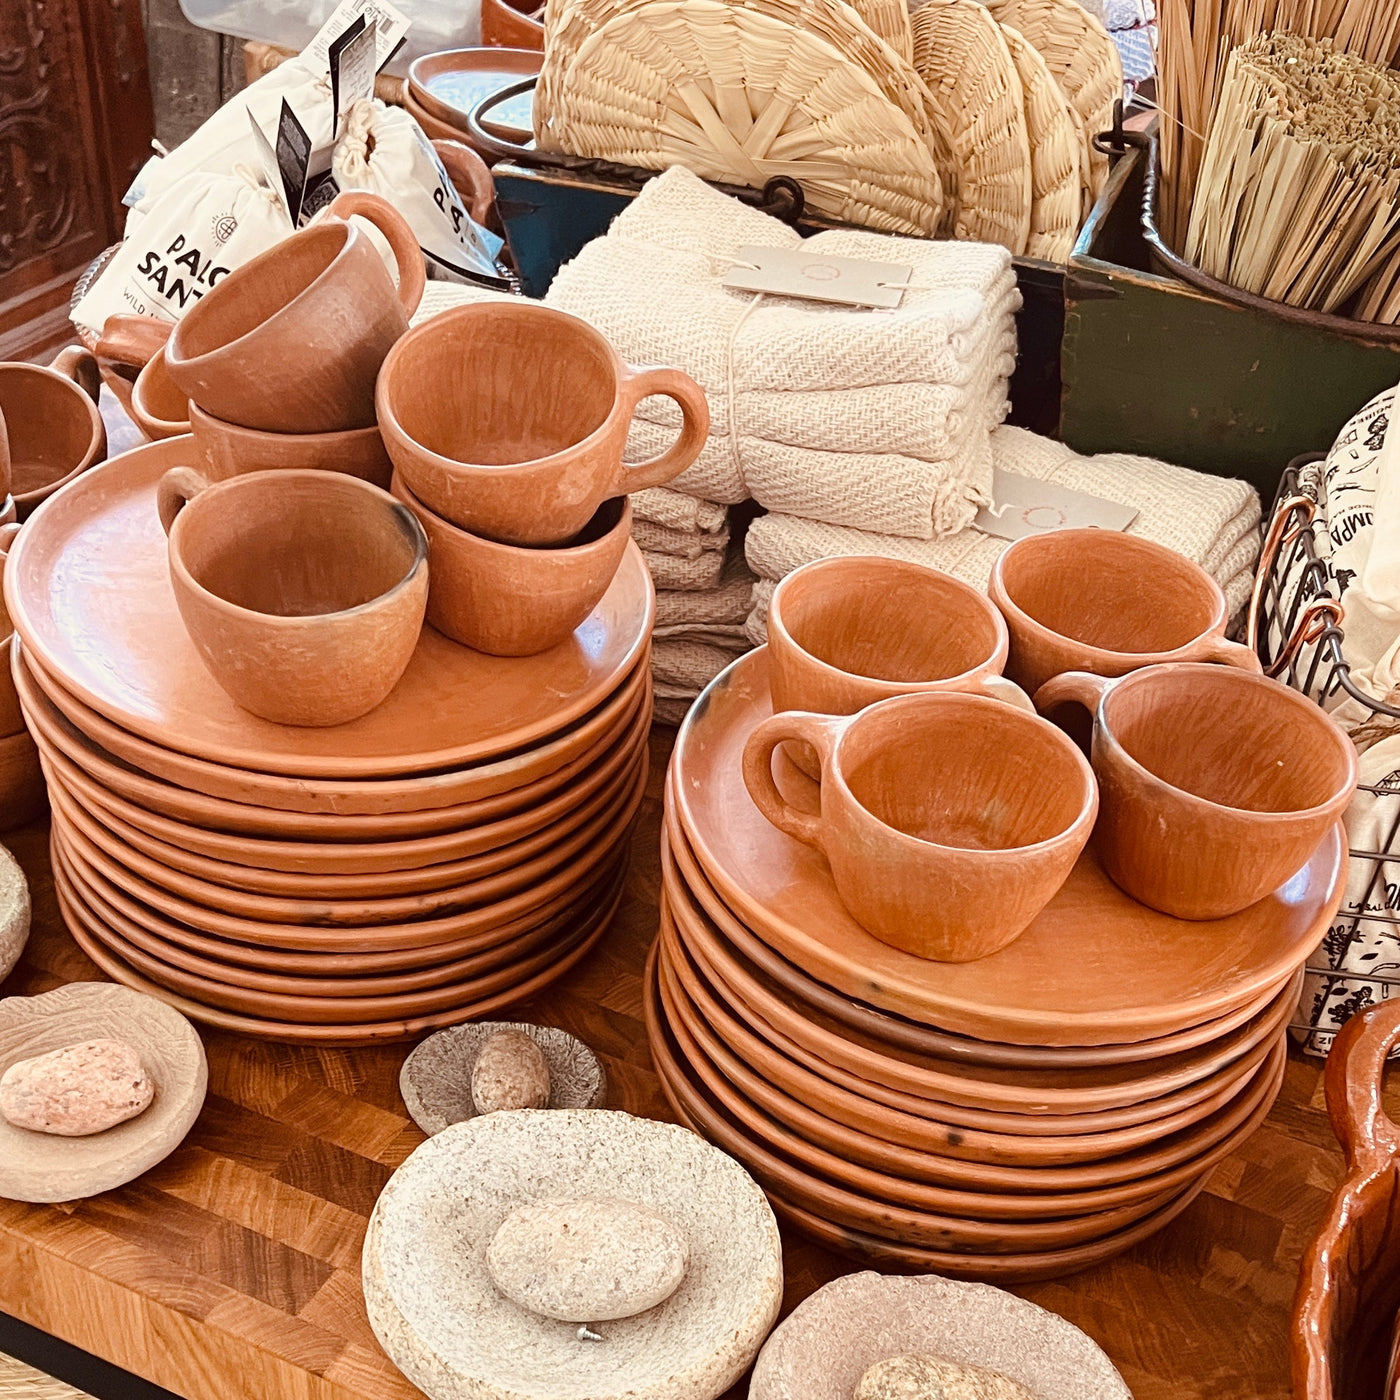 Collection photo for our "Tableware" collection. Image showcases multiple styles of clay kitchen items like plate and mugs